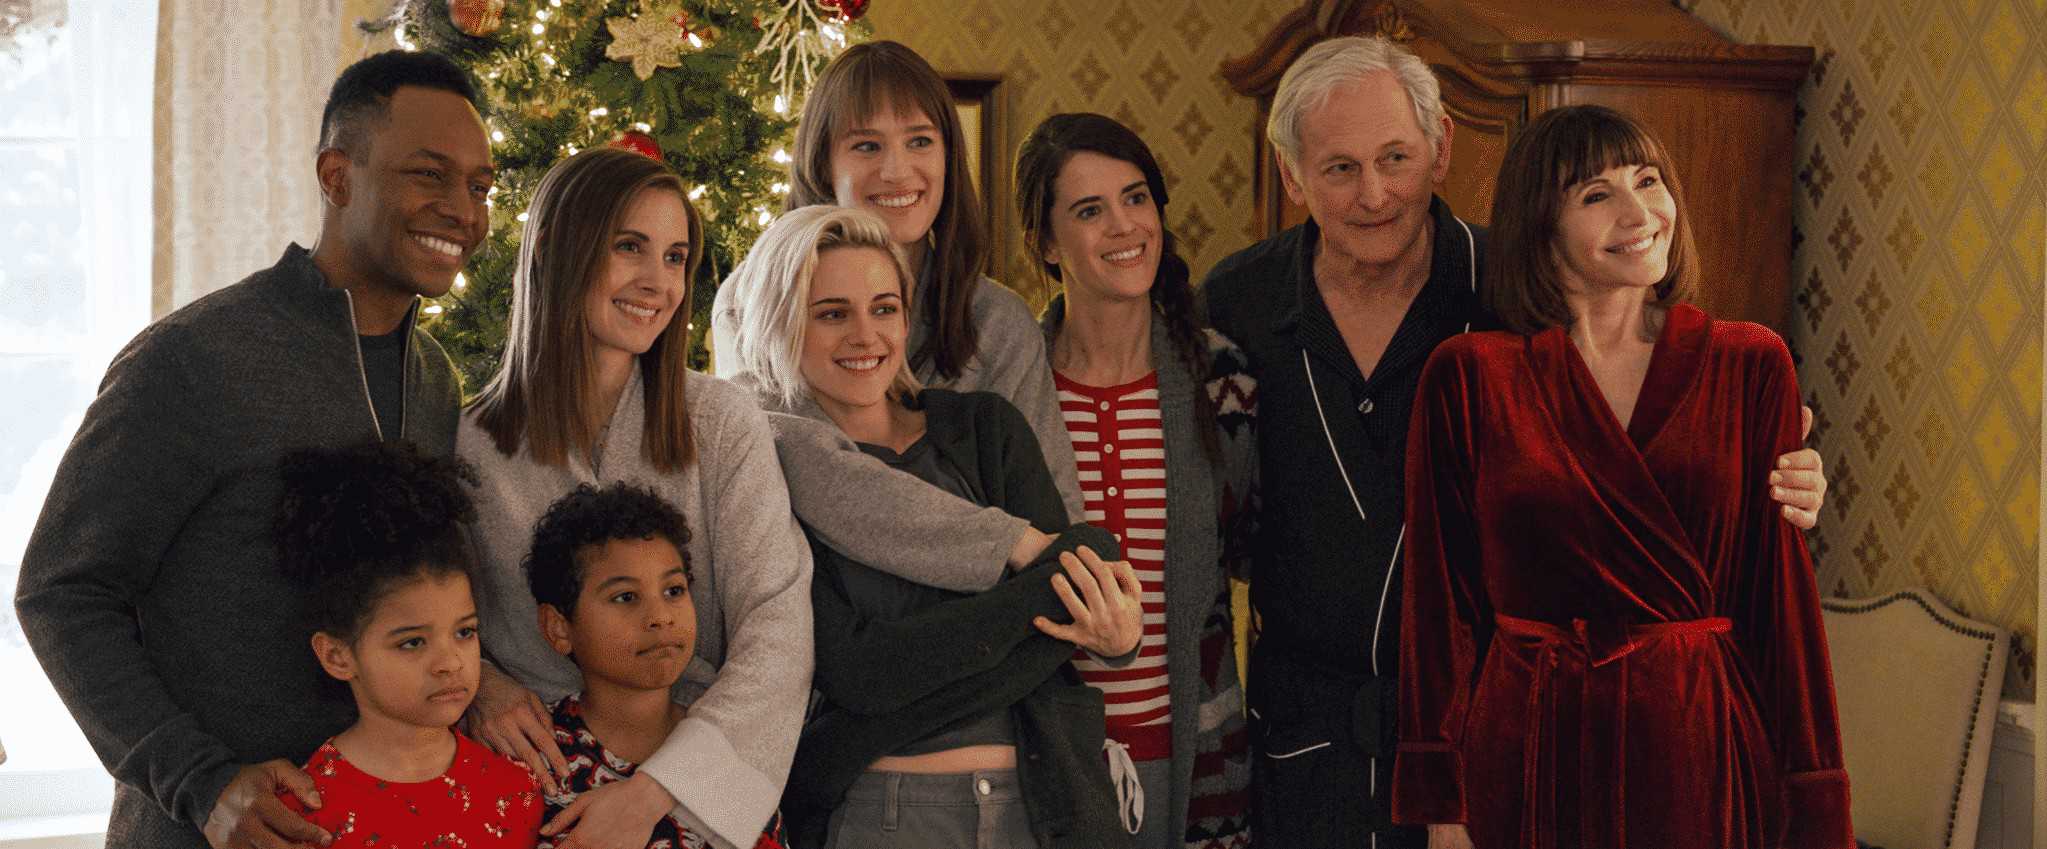 (l to r) Eric (BURL MOSELEY), Magnus (ANIS N'DOBE), Sloane (ALISON BRIE), MATILDA (ASIYIH N'DOBE), Abby (KRISTEN STEWART), Harper (MACKENZIE DAVIS), Jane (MARY HOLLAND), Ted (VICTOR GARBER) and Tipper (MARY STEENBURGEN) pose at last for their family Christmas picture